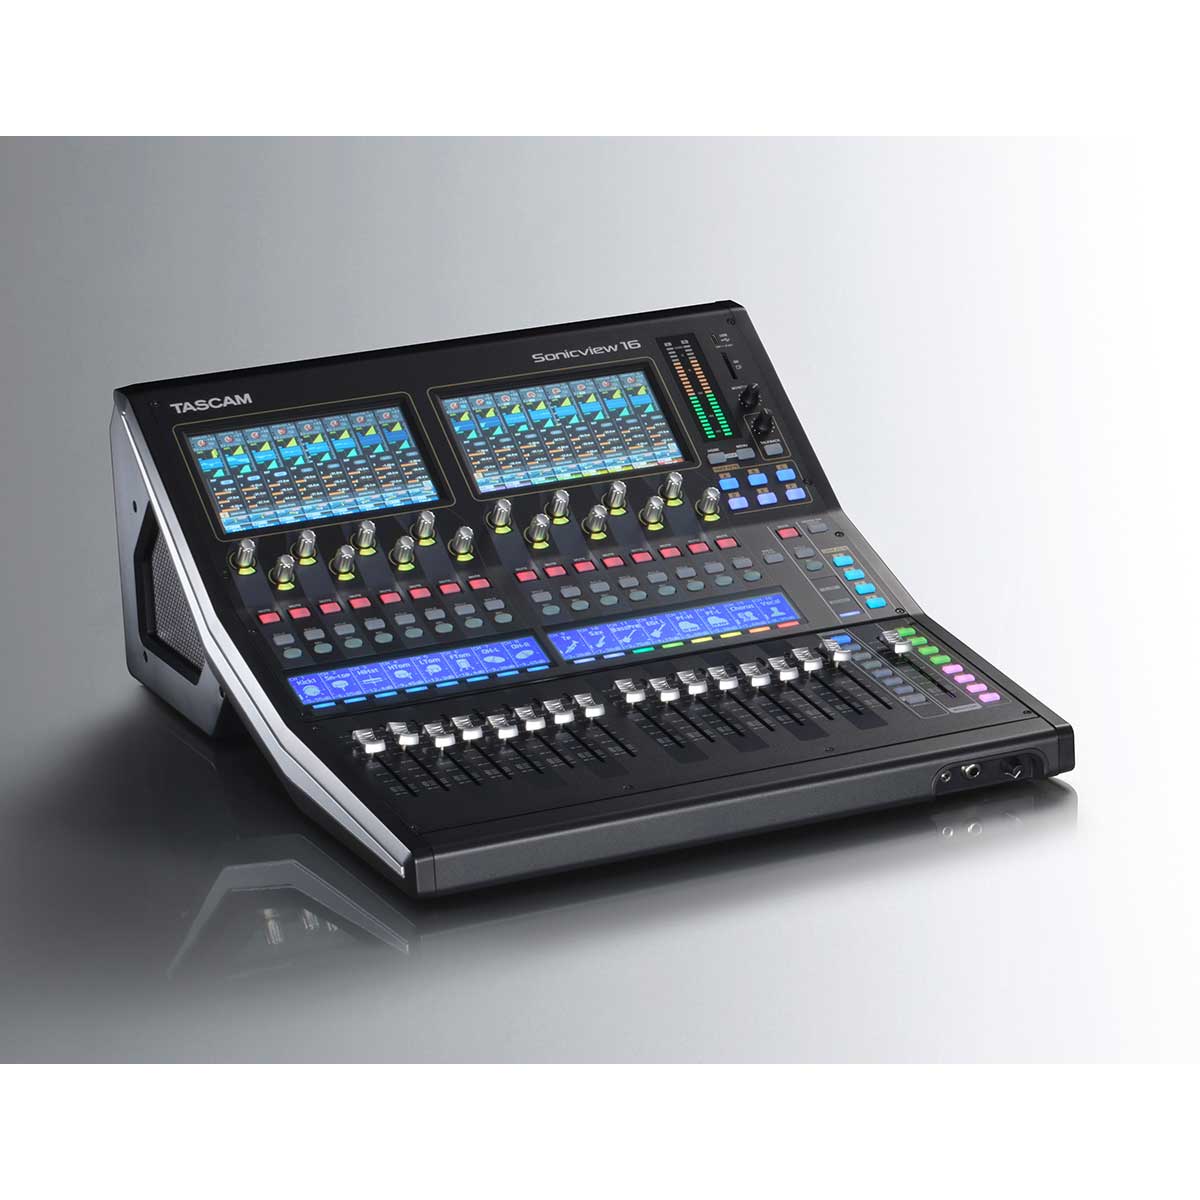 Tascam SonicView 16 Digital Recording Console